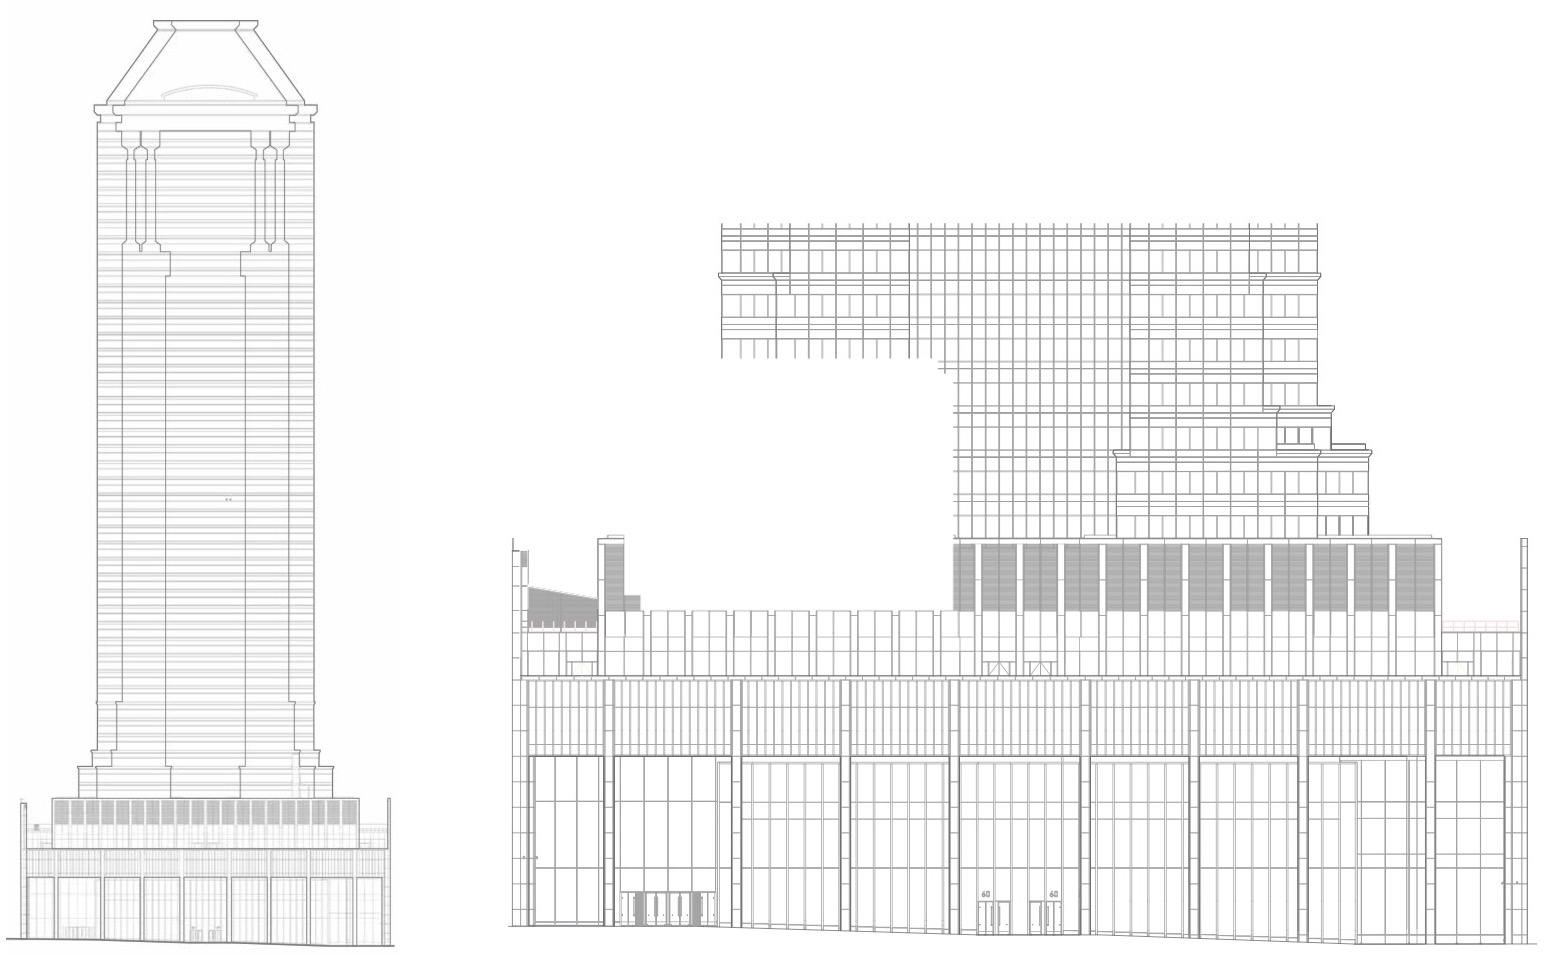 Drawings illustrate proposed changes to 60 Wall Street's front elevation